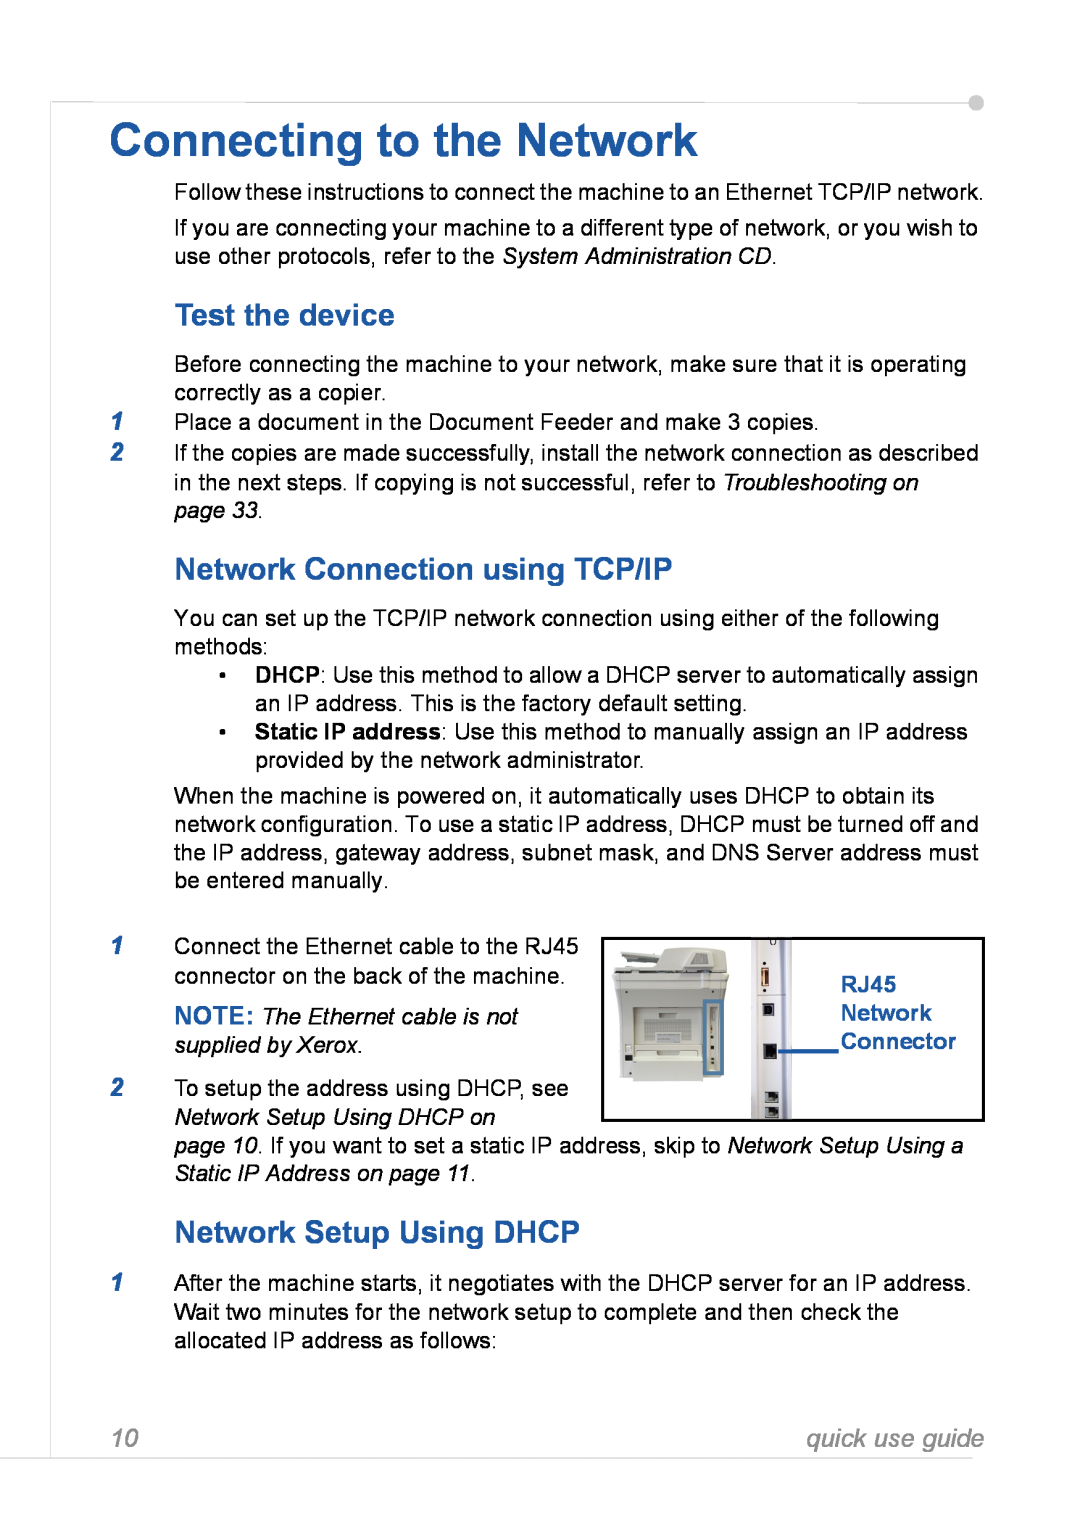 Xerox 3635MFP Connecting to the Network, Test the device, Network Connection using TCP/IP, Network Setup Using DHCP, RJ45 